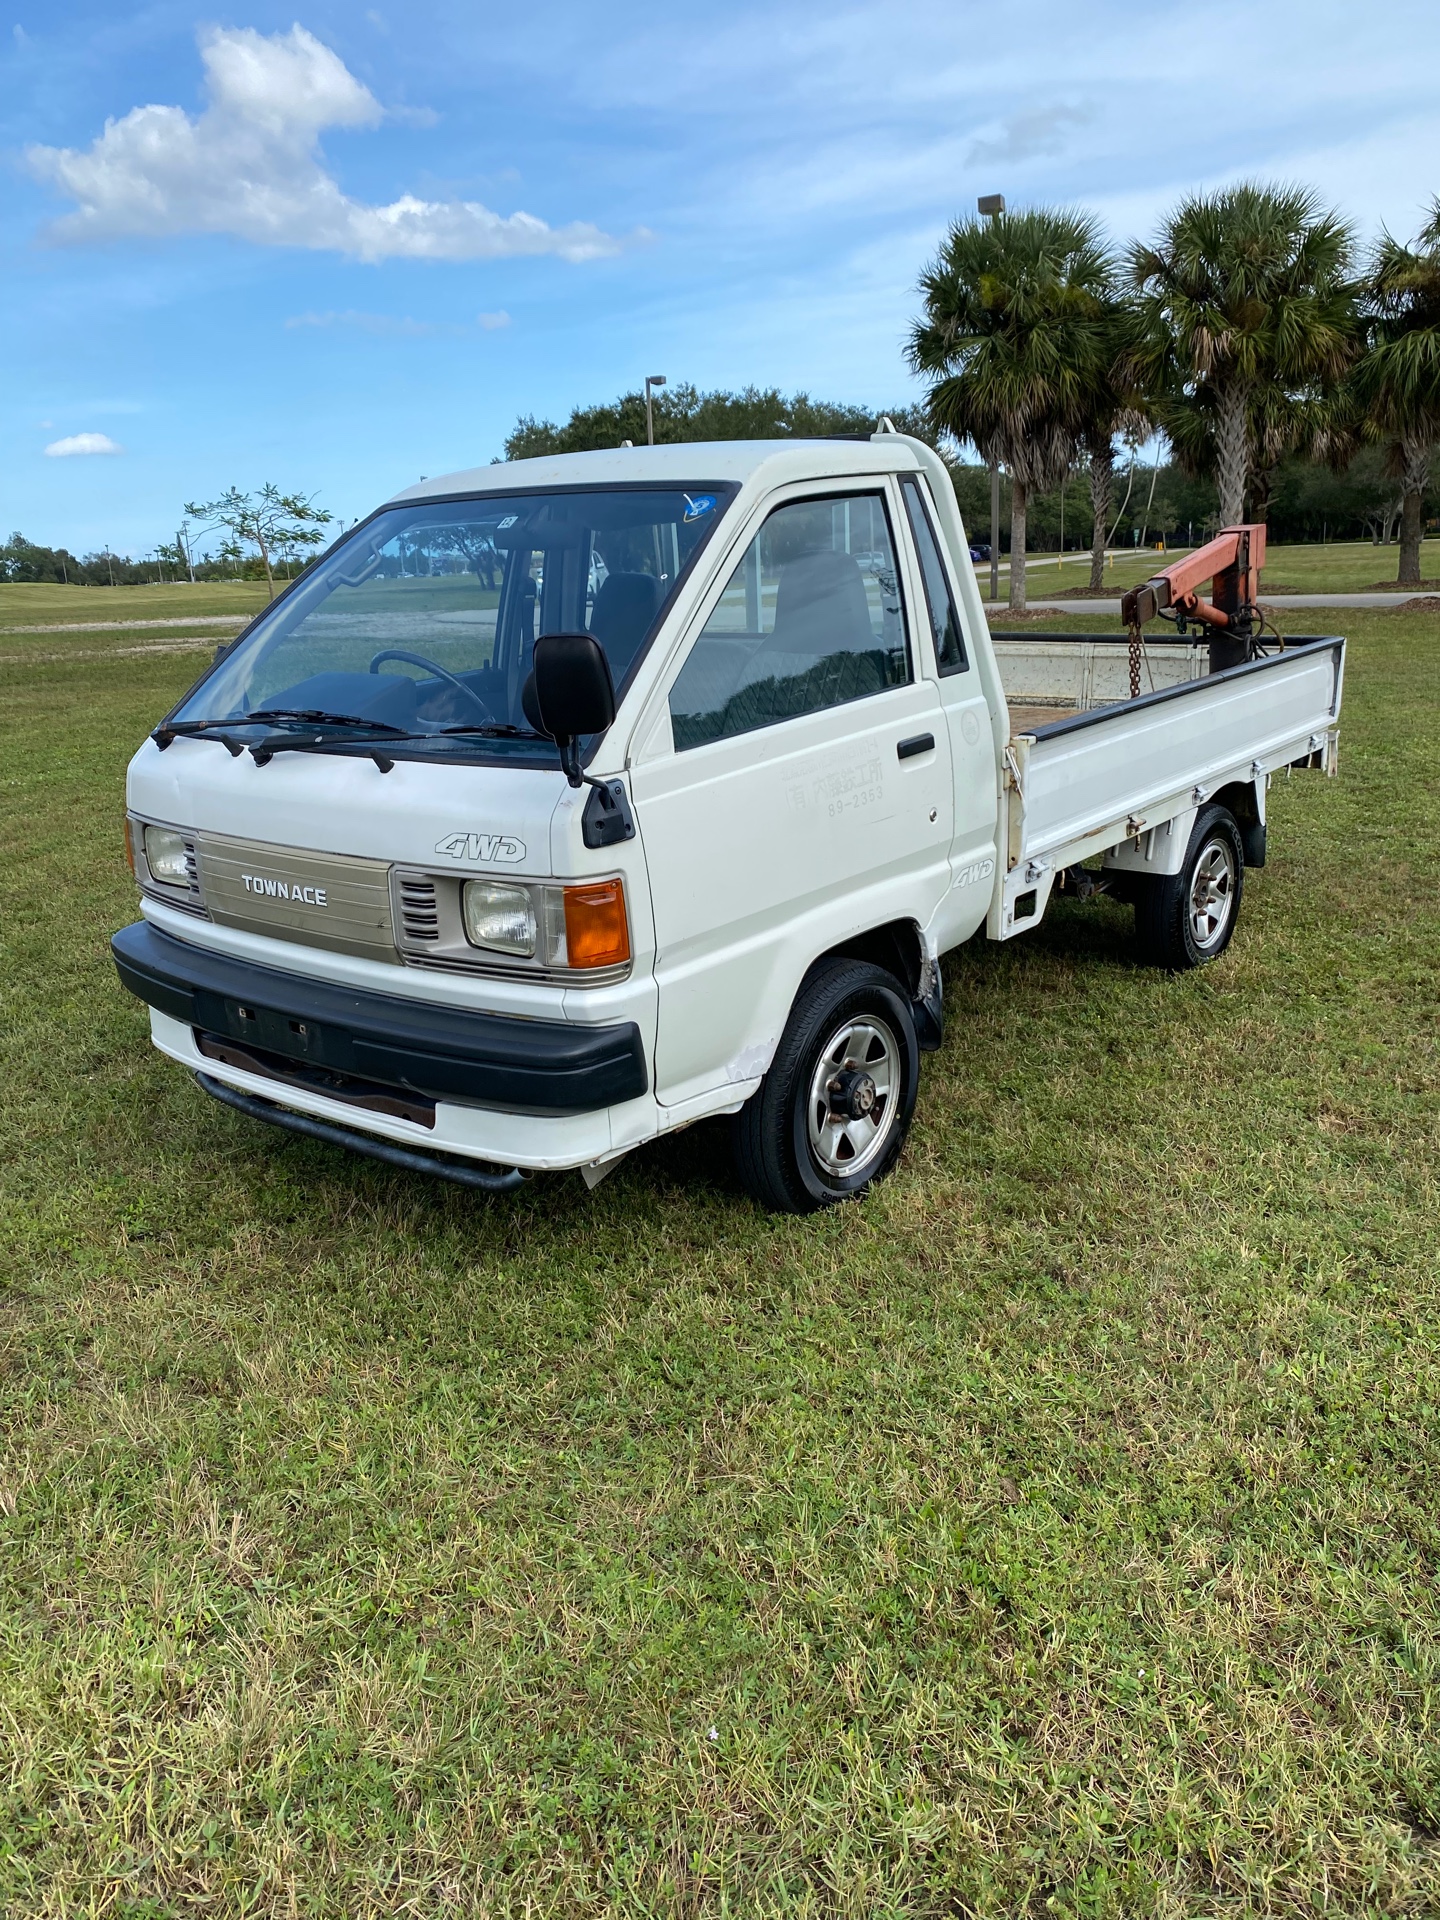 Toyota Town Ace Truck from Japan